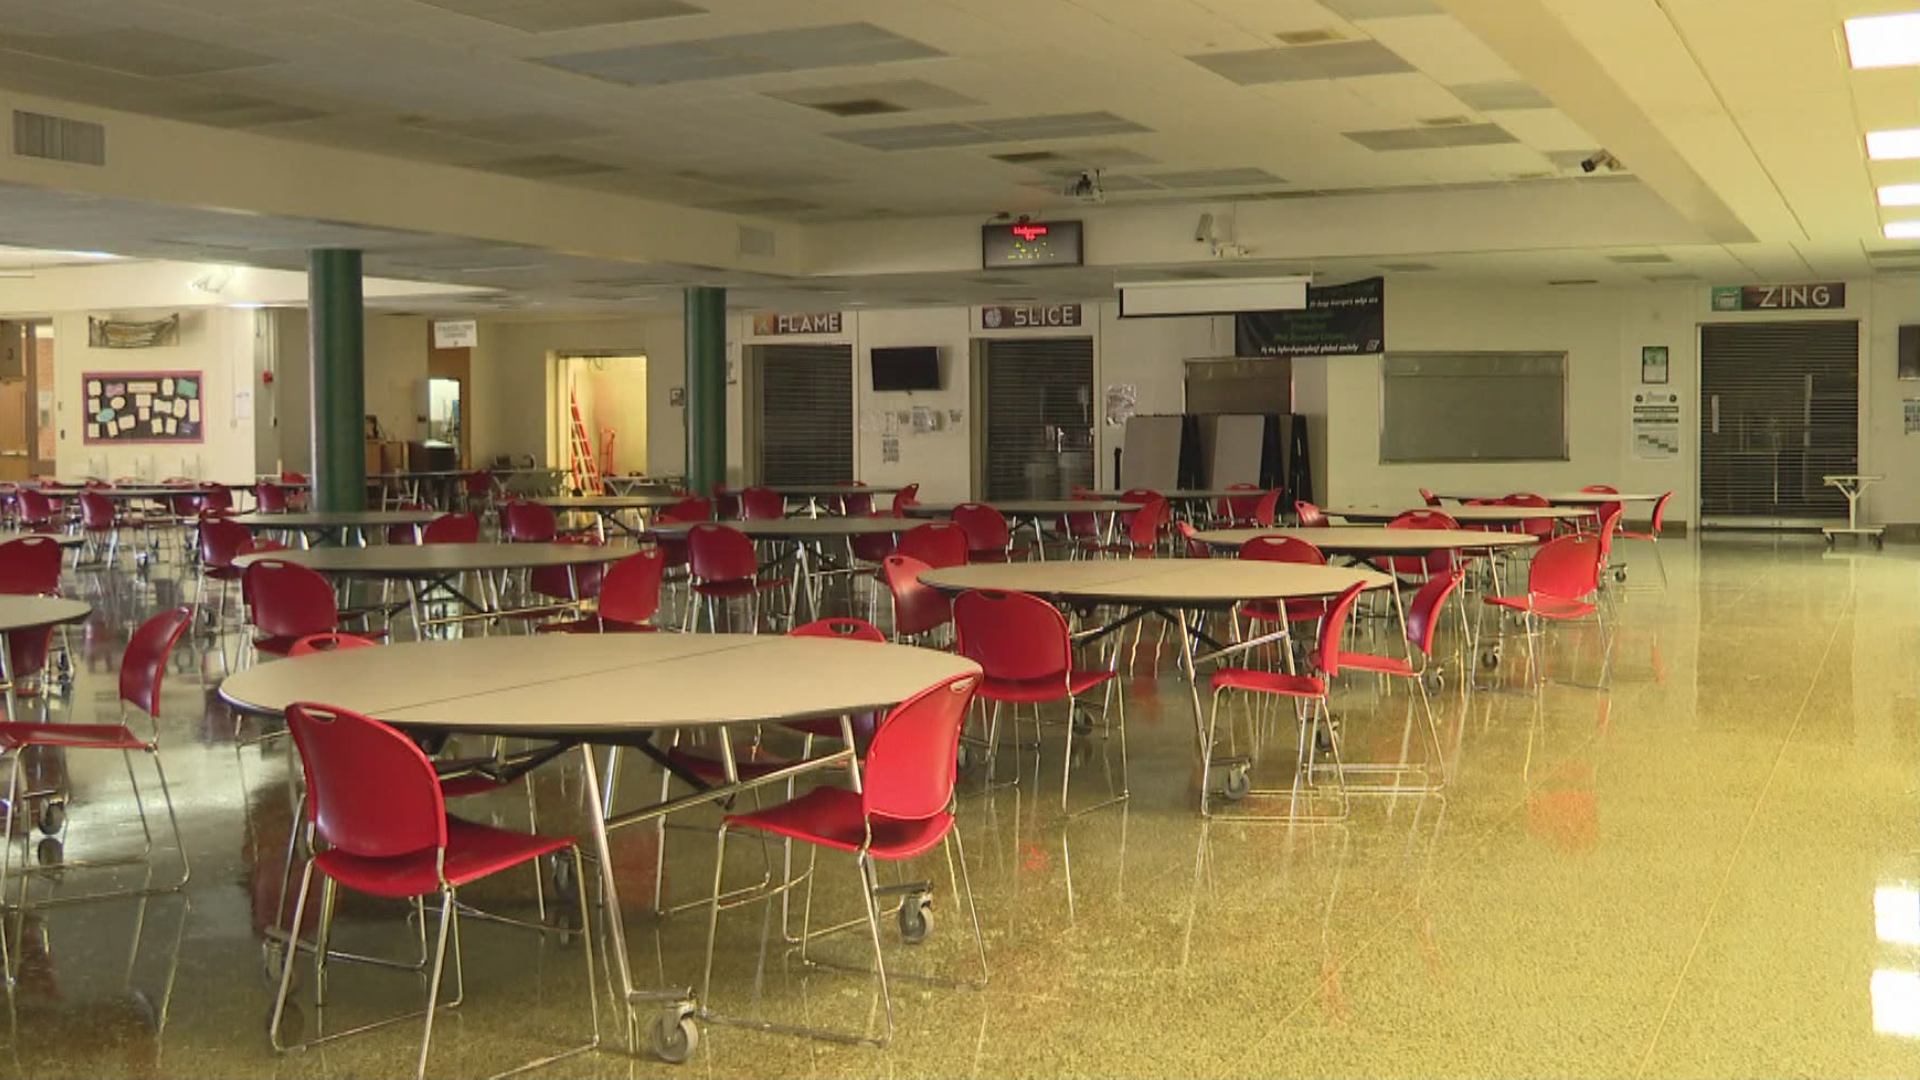 A pretty big change is coming Monday to one of the state's largest school districts.